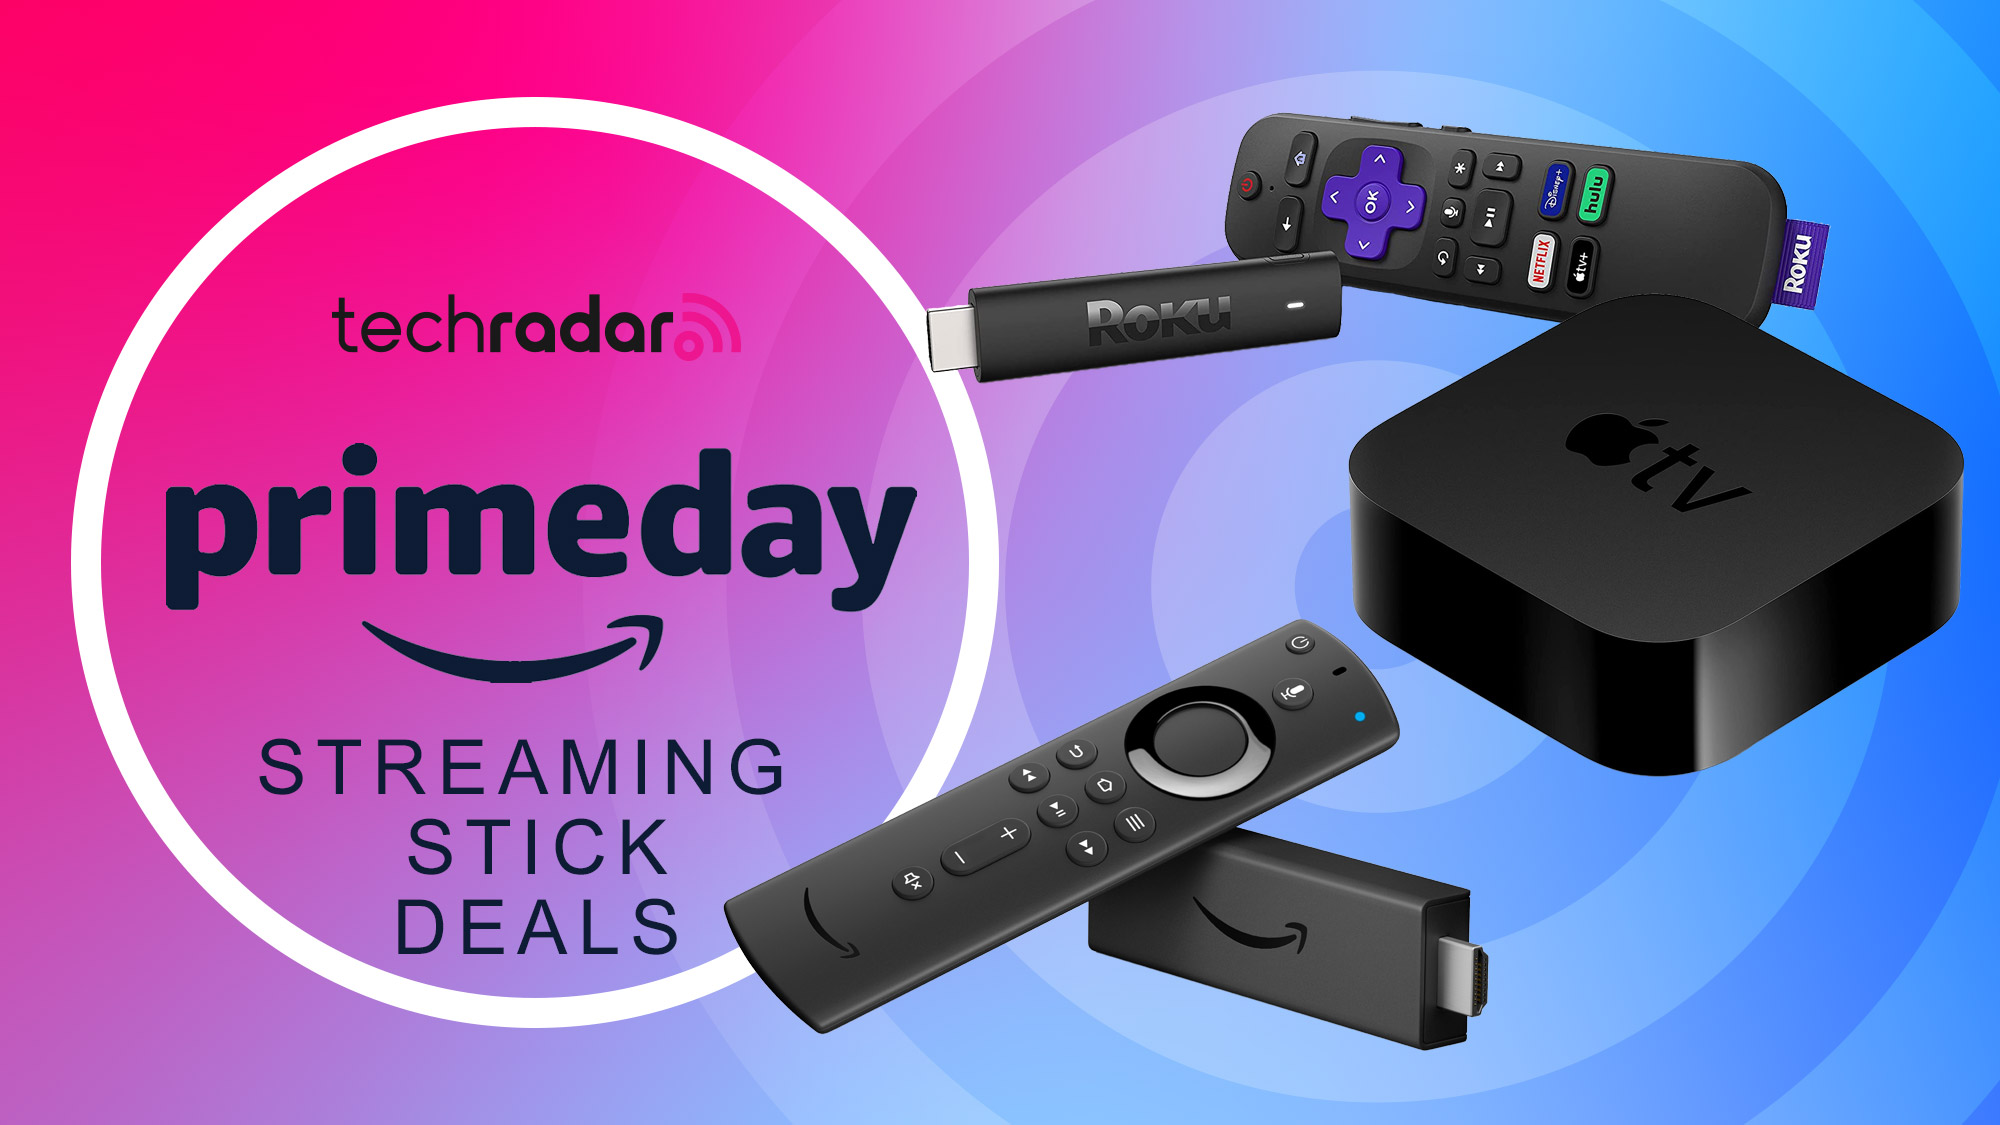 Should You Buy a Cheap Fire TV on Prime Day? - CNET